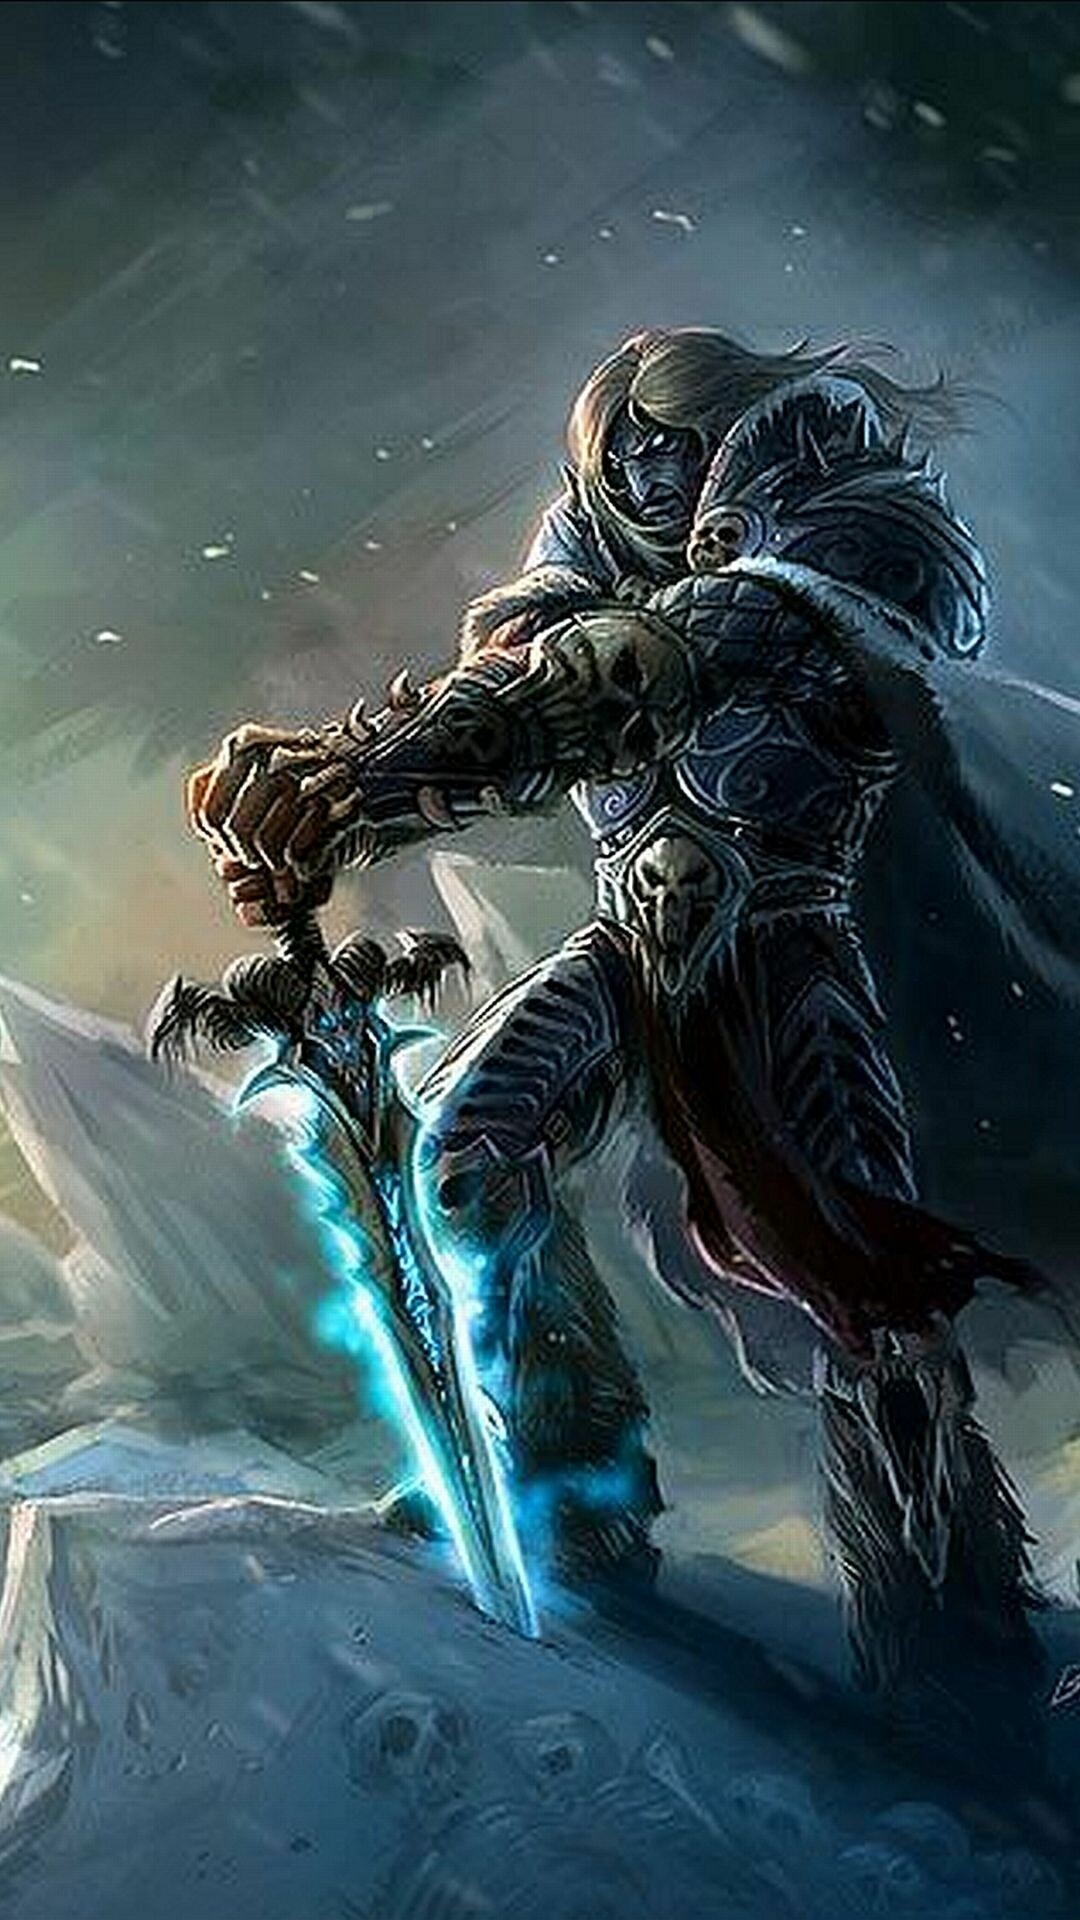 Knight: World of Warcraft: Wrath of the Lich King, Warrior. 1080x1920 Full HD Wallpaper.